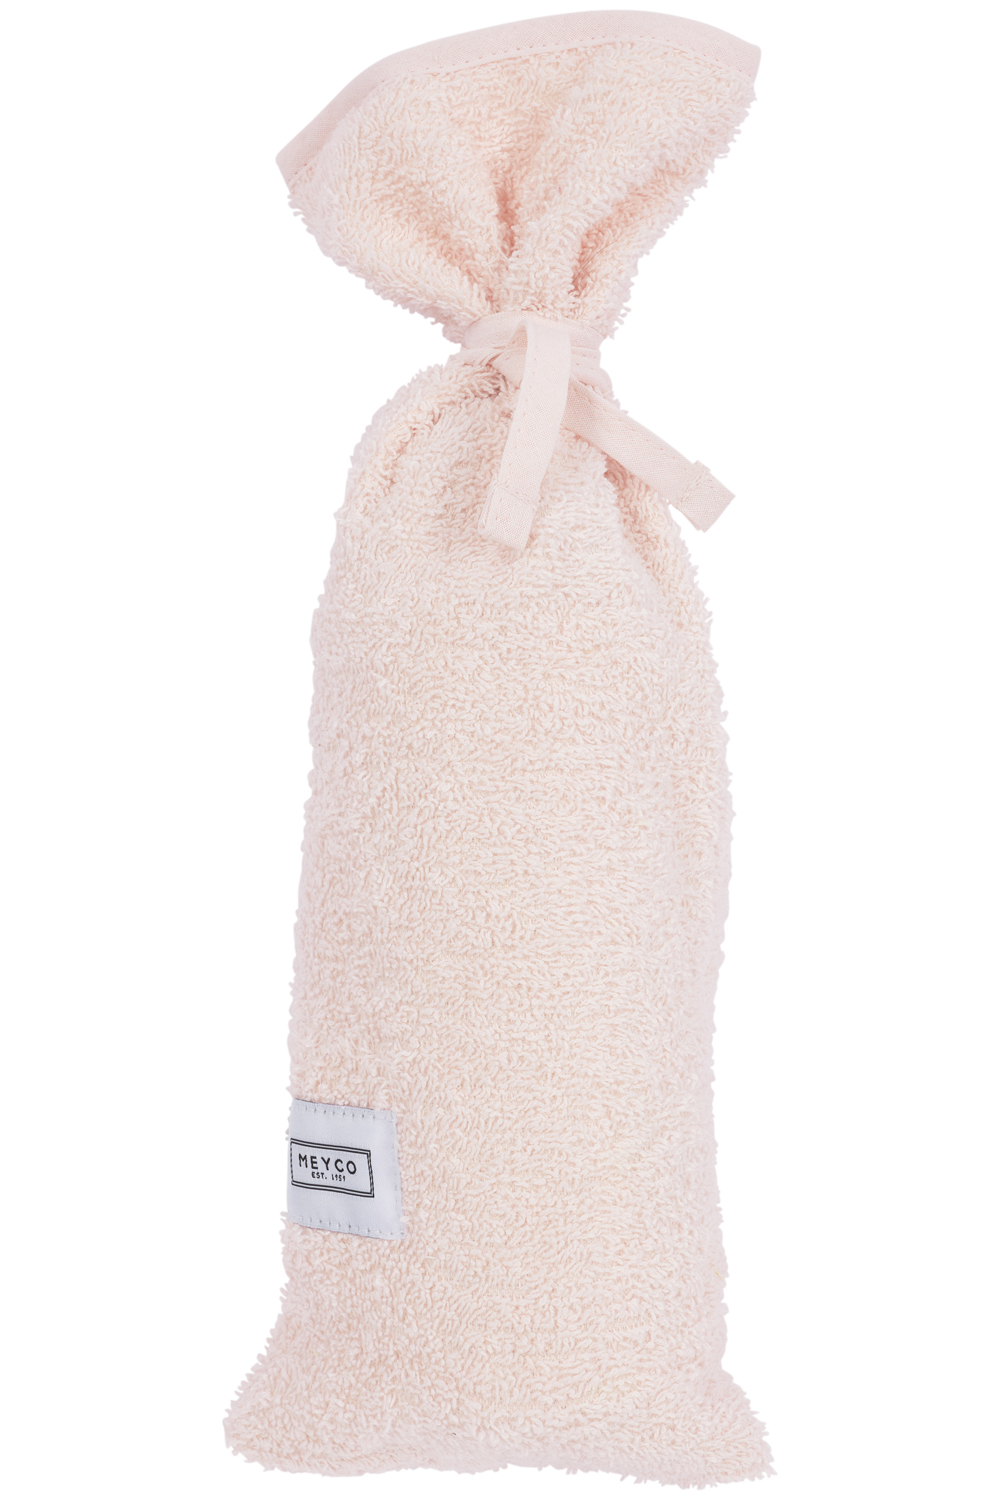 Hot Water Bottle Cover Basic Terry - Soft Pink - 13xh35cm